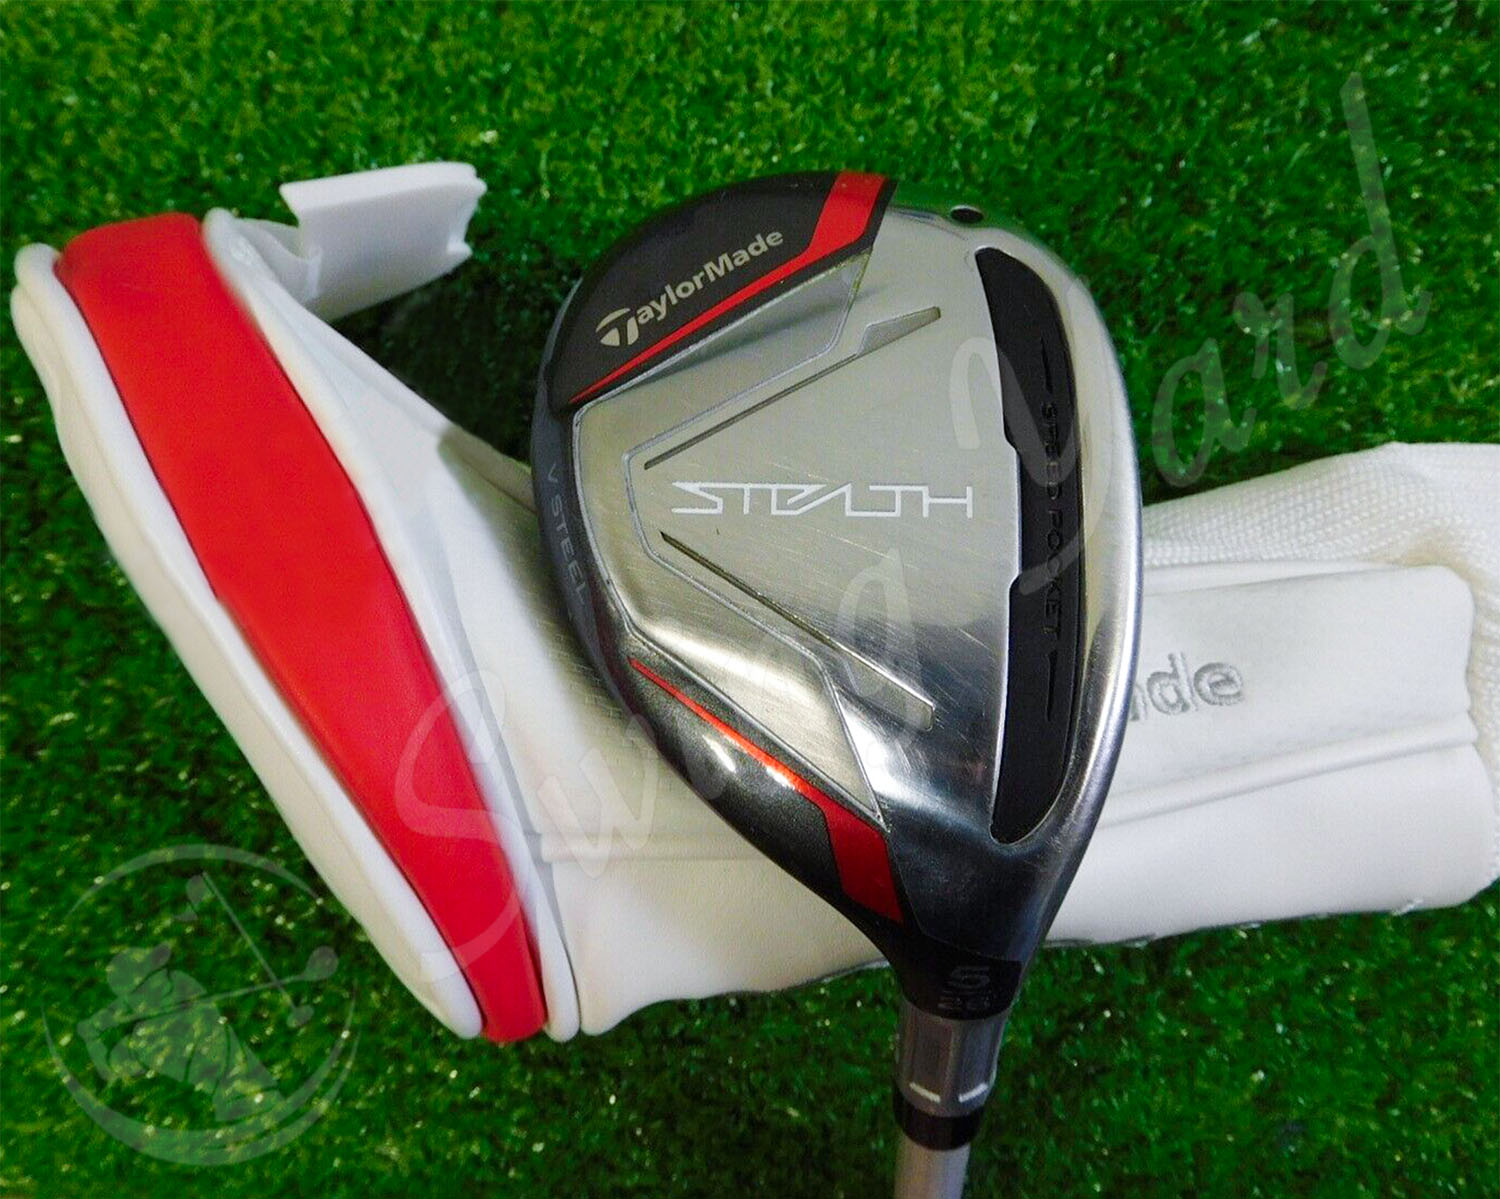 TaylorMade Stealth Women’s Hybrid driver for testing at the golf course